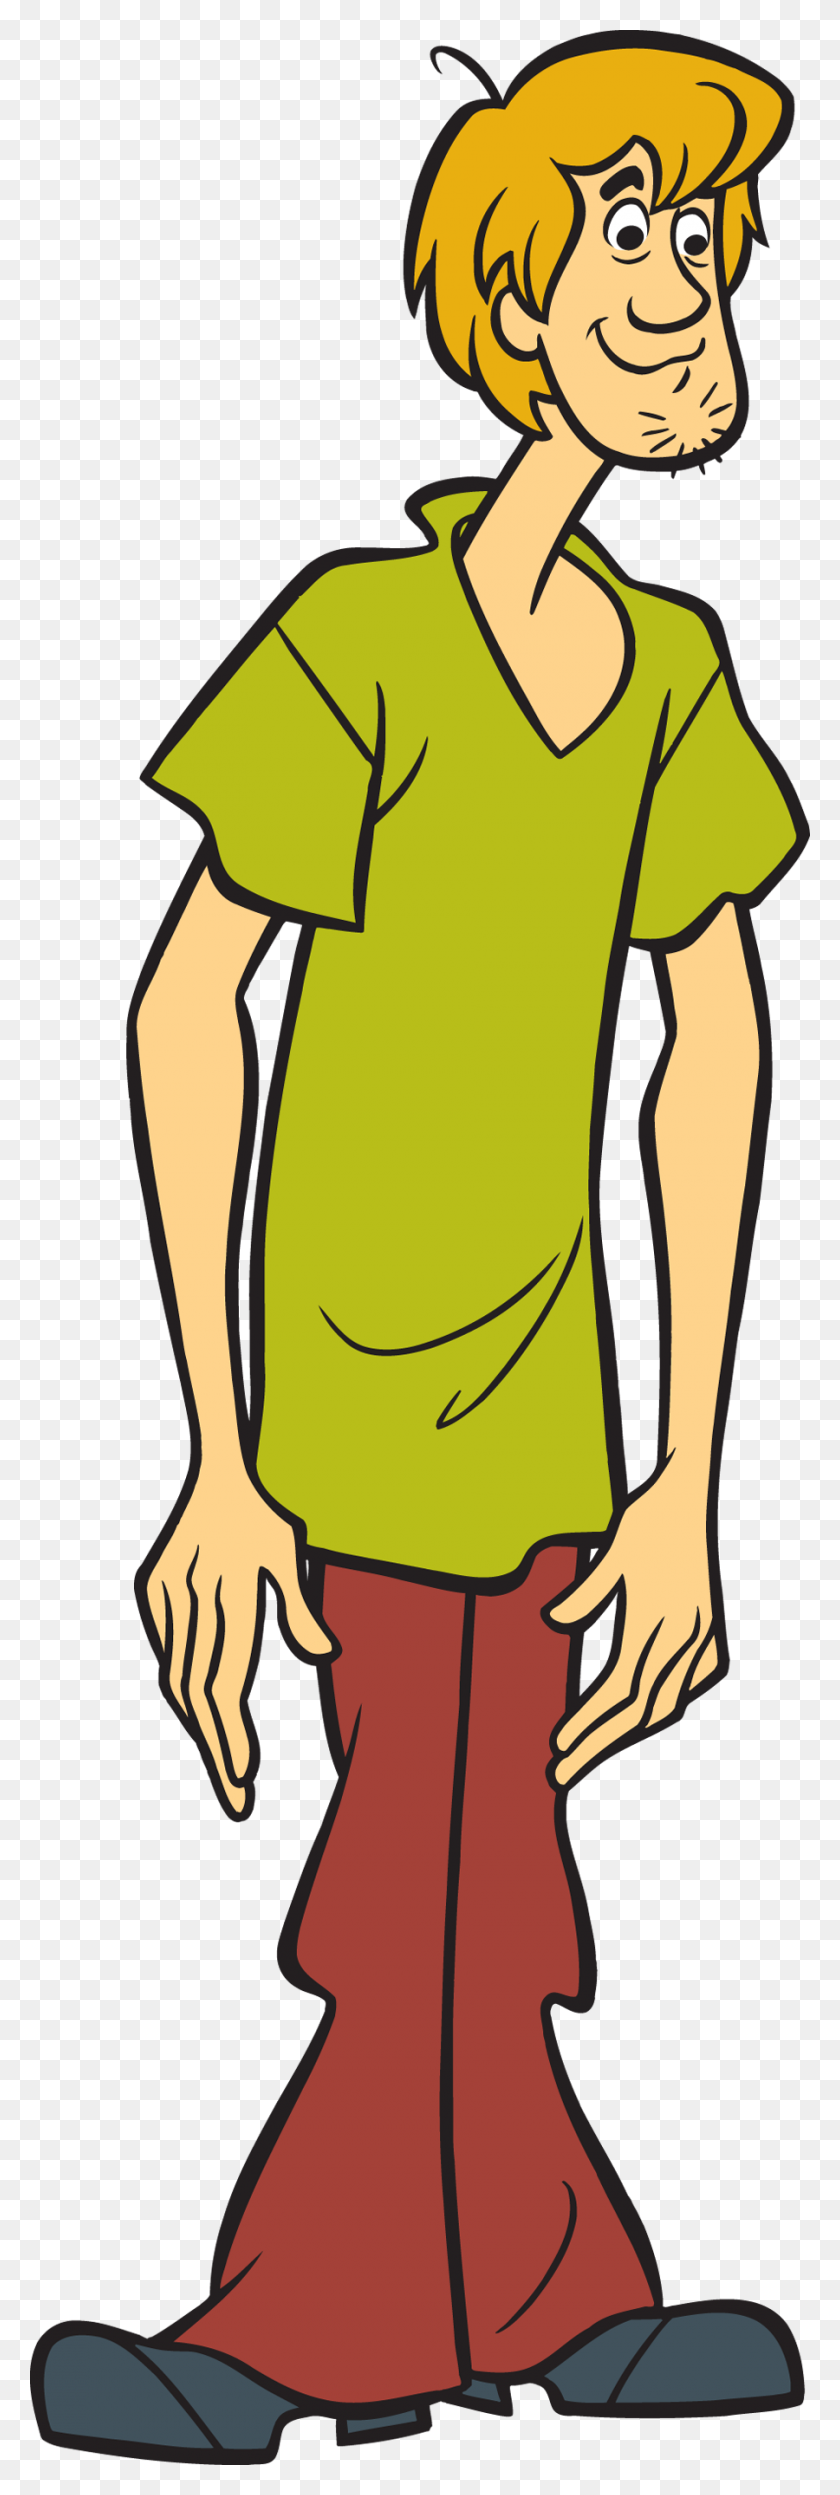 900x2810 Image - Shaggy PNG